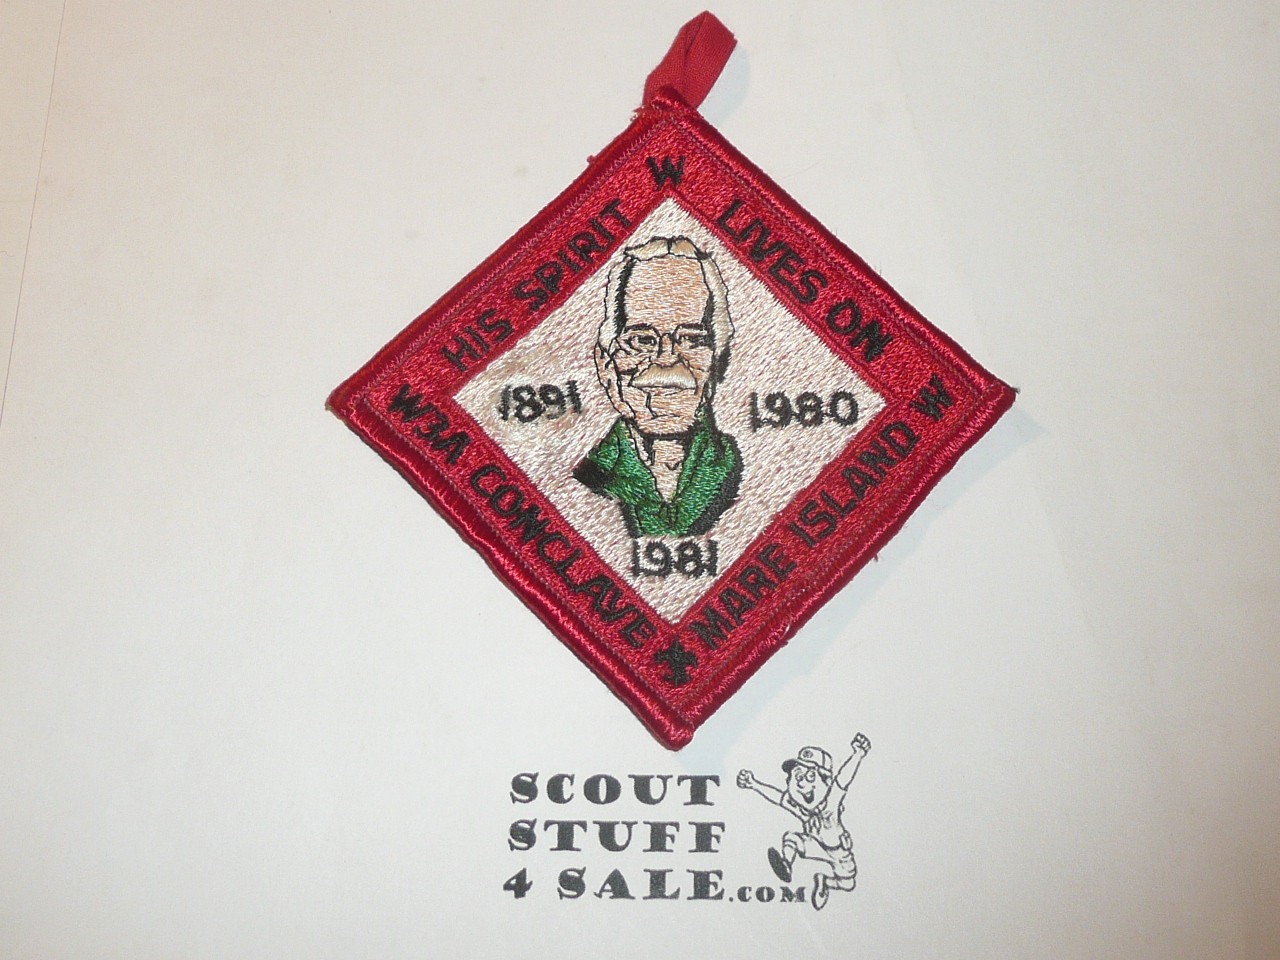 Section W3A 1981 O.A. Conclave Patch - Scout